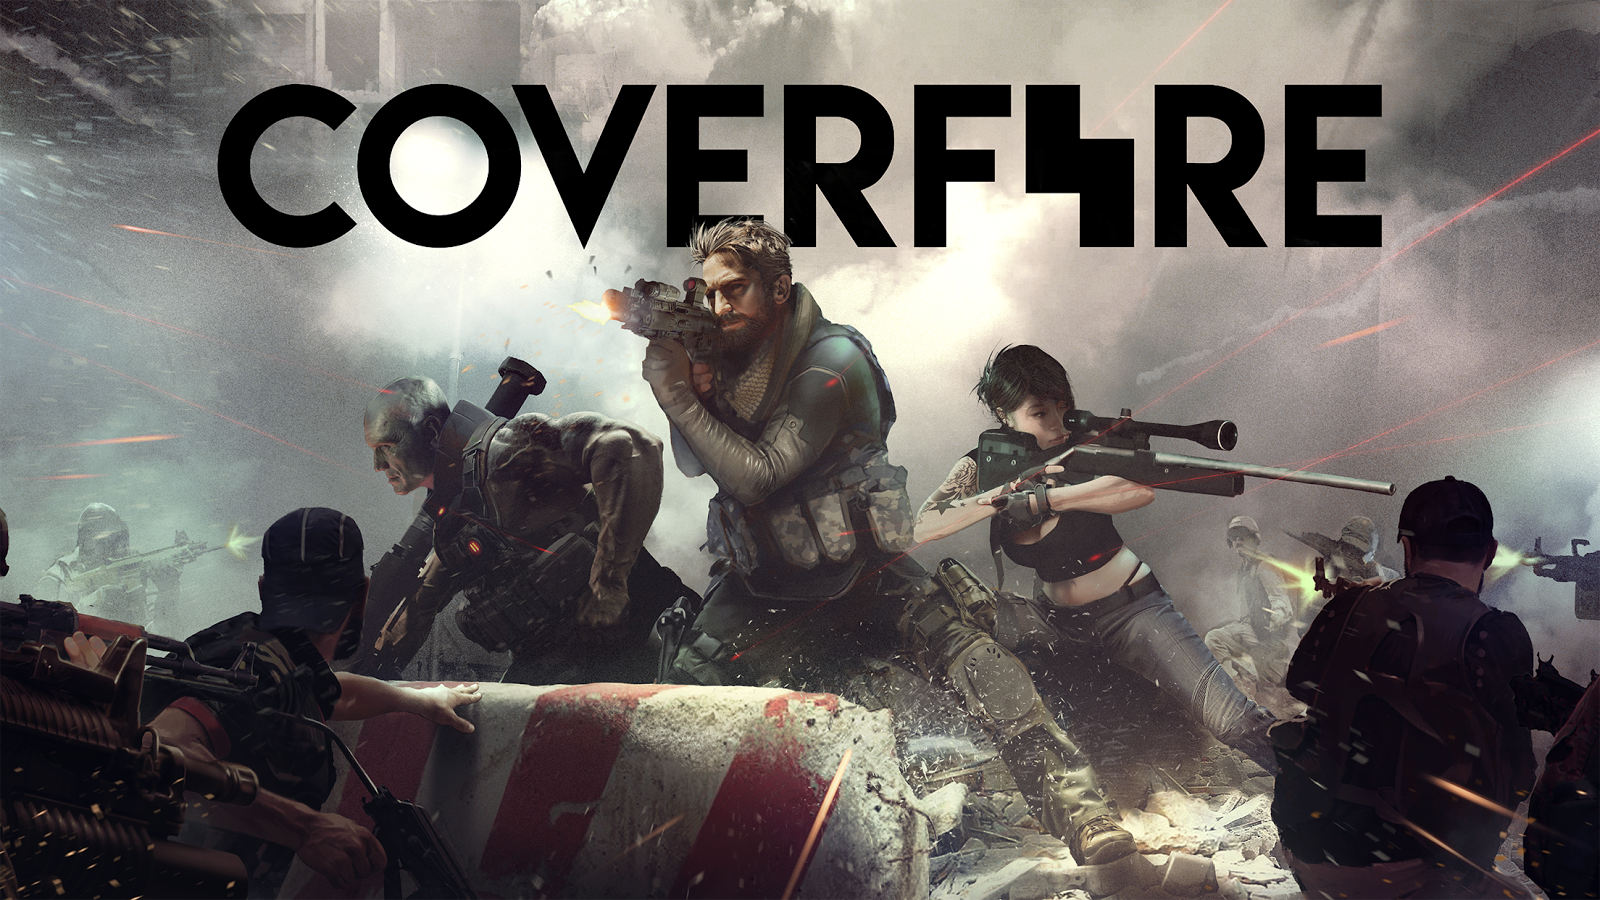 Cover Fire v1.7.0 Mod Apk Data Unlimited Money/VIP For Android